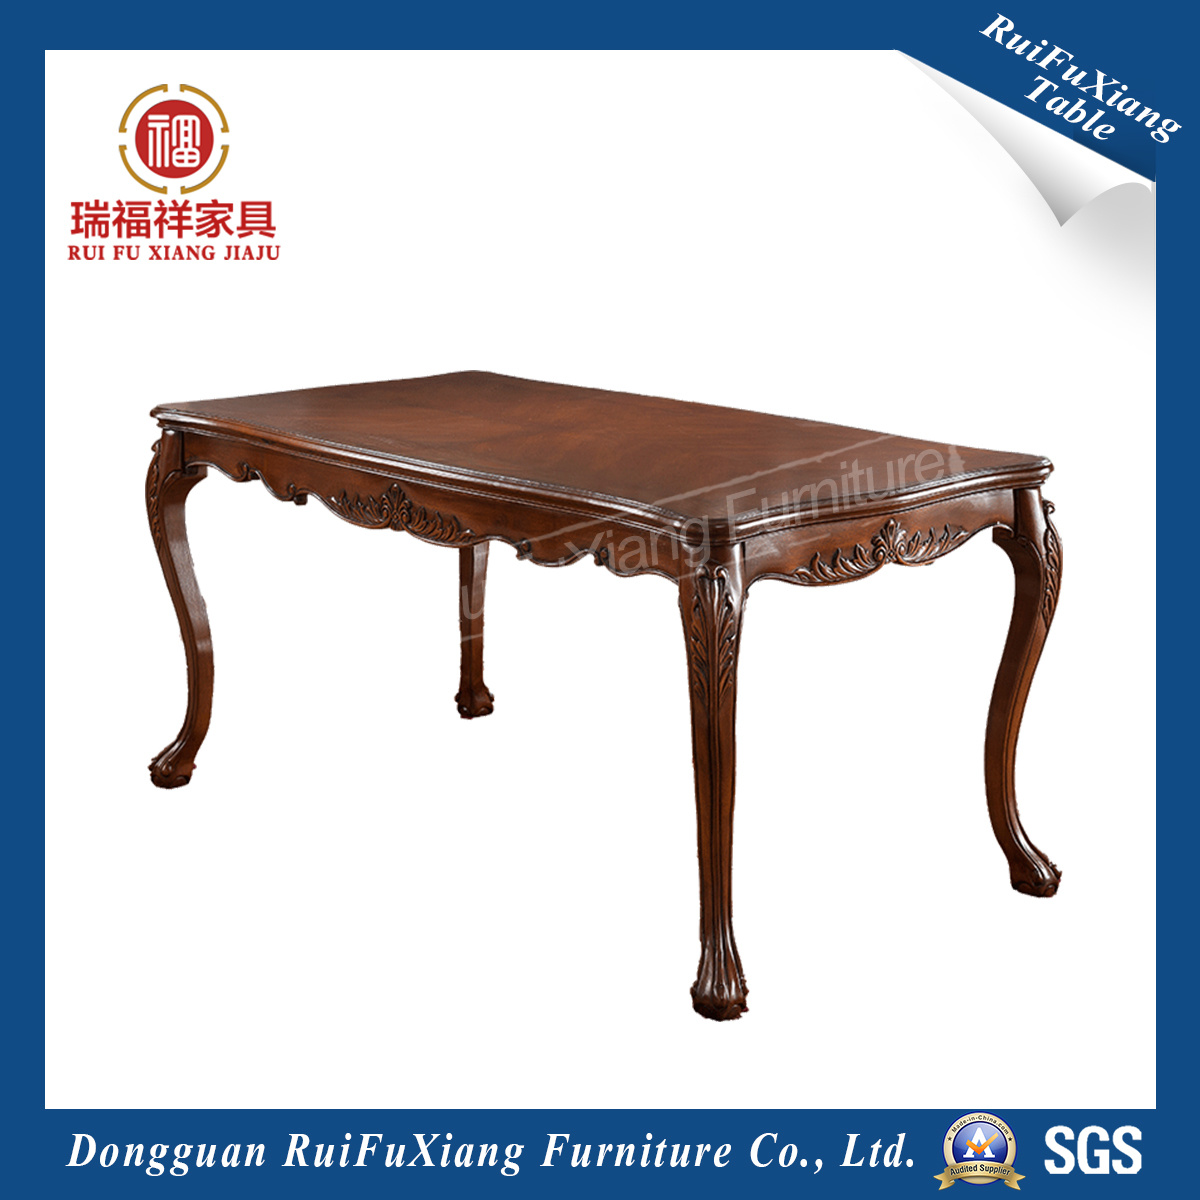 1+6 Dining Table Set (AA218)